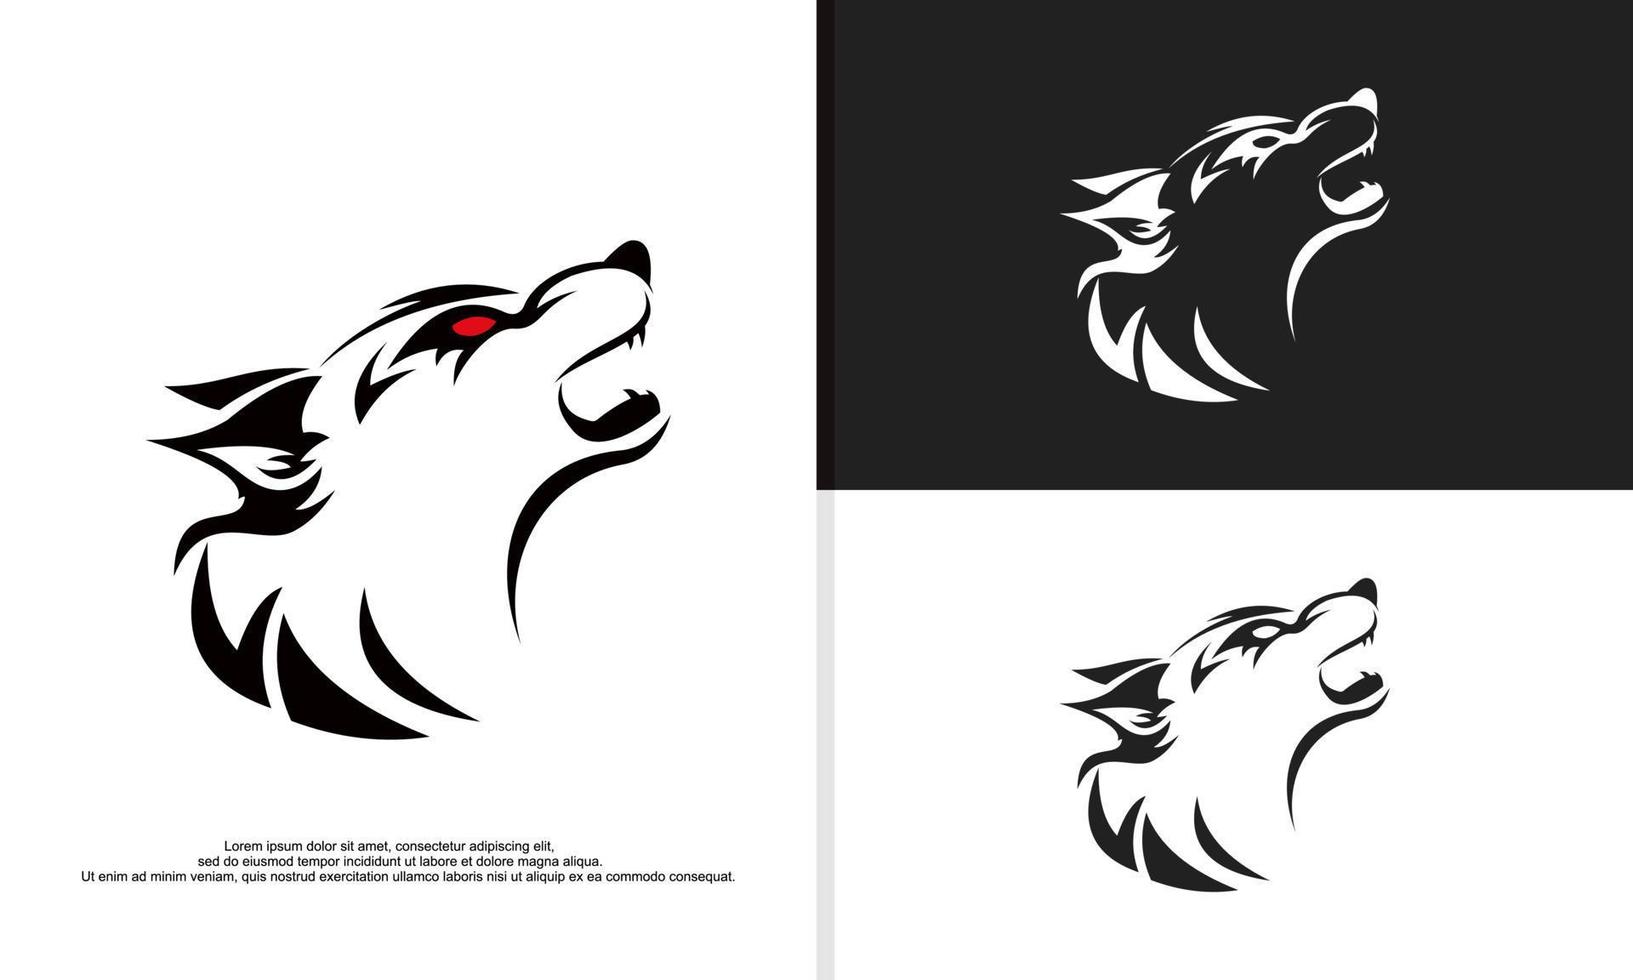 logo illustration vector graphic of wolf head in tribal style